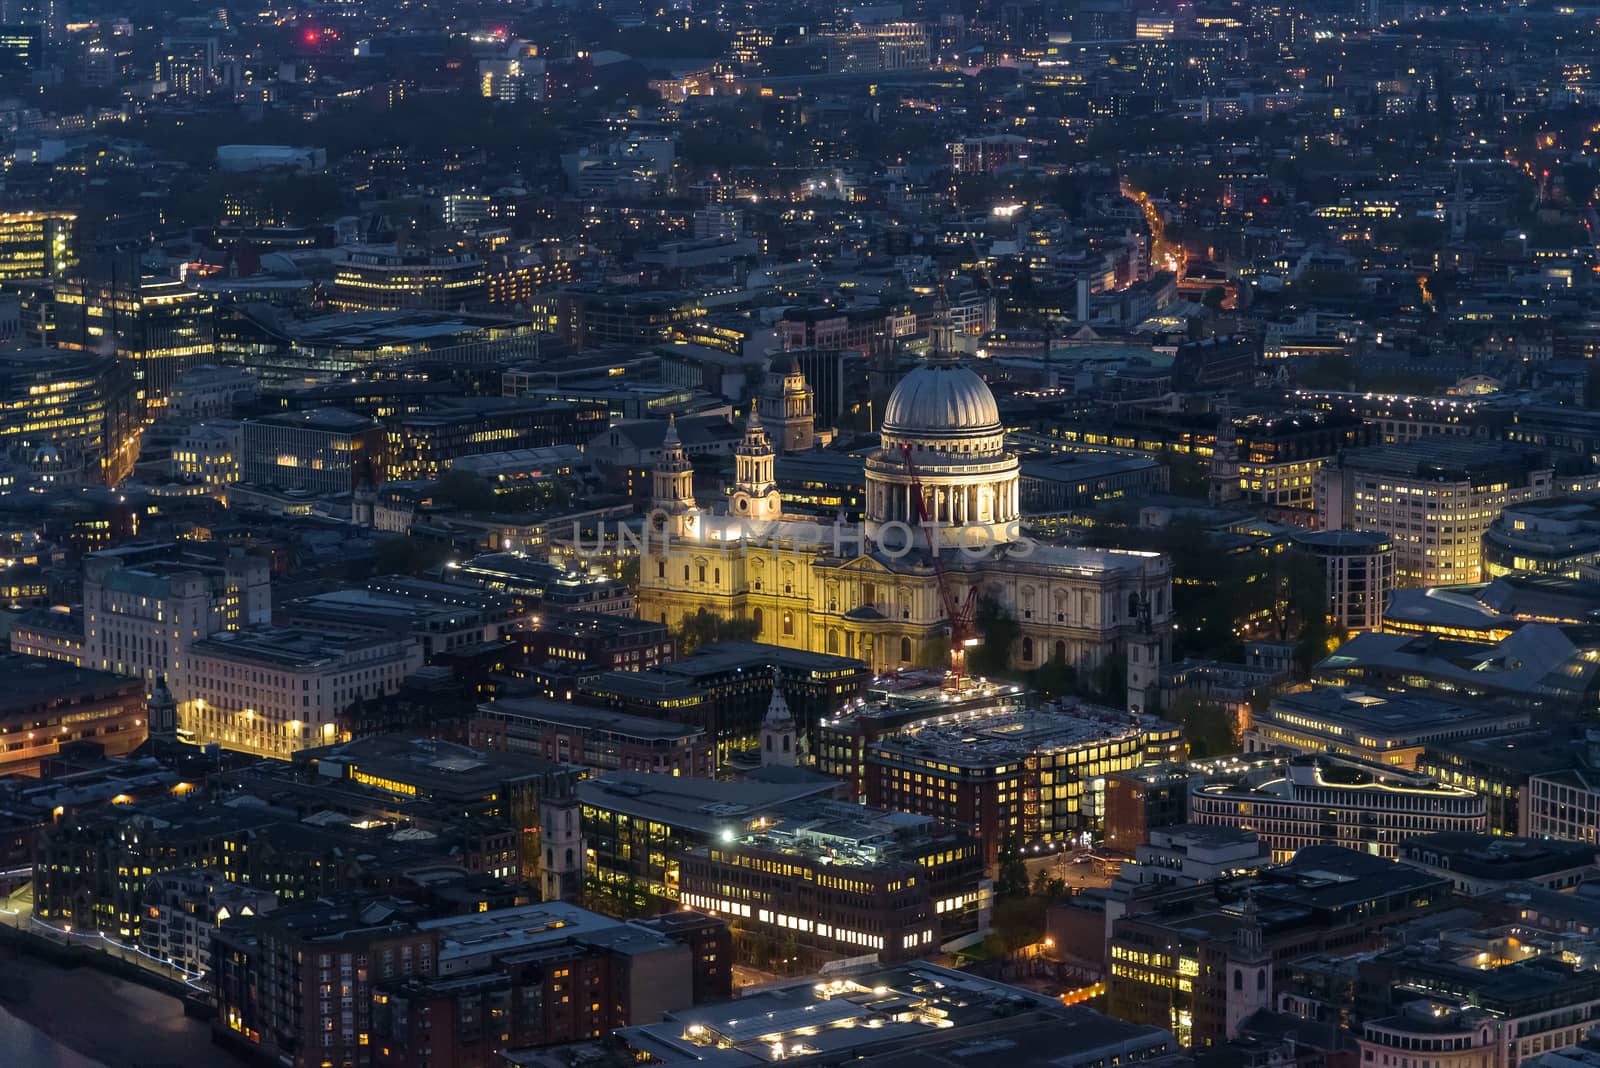 Aerial view of St Pauls Cathedral in London at night by mkos83